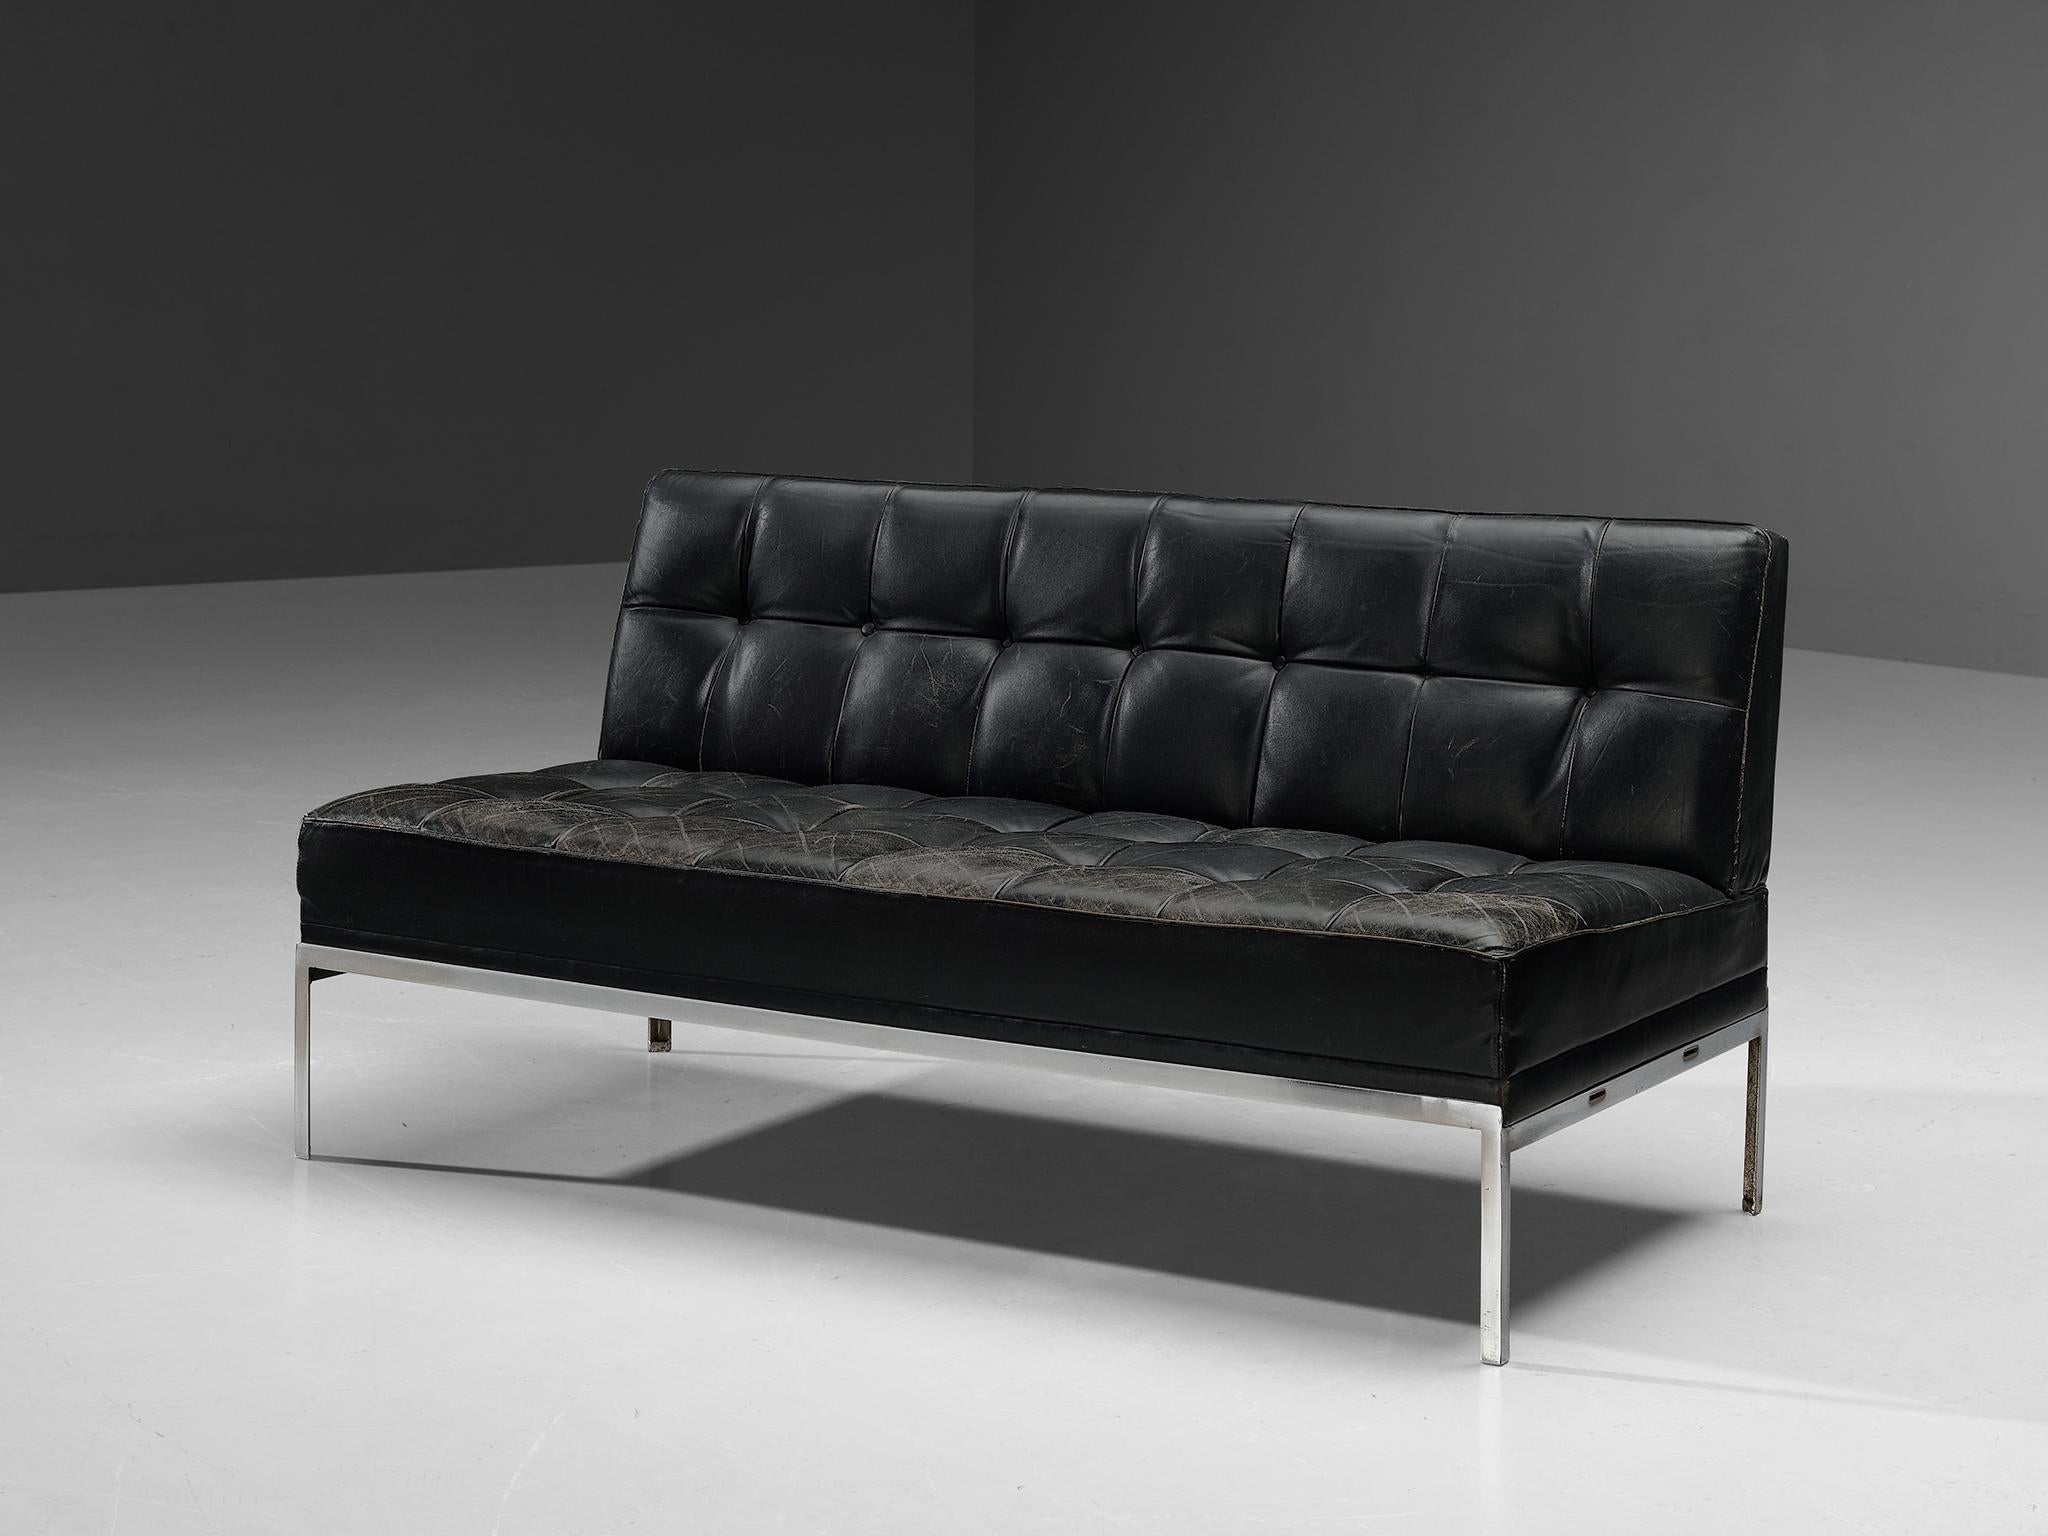 Johannes Spalt for Wittmann, sofa or settee, leather, chromed steel, Austria, 1960s

This subtle and modest sofa is designed by the talented Austrian furniture designer Johannes Spalt. The design is characterized by a solid construction based on